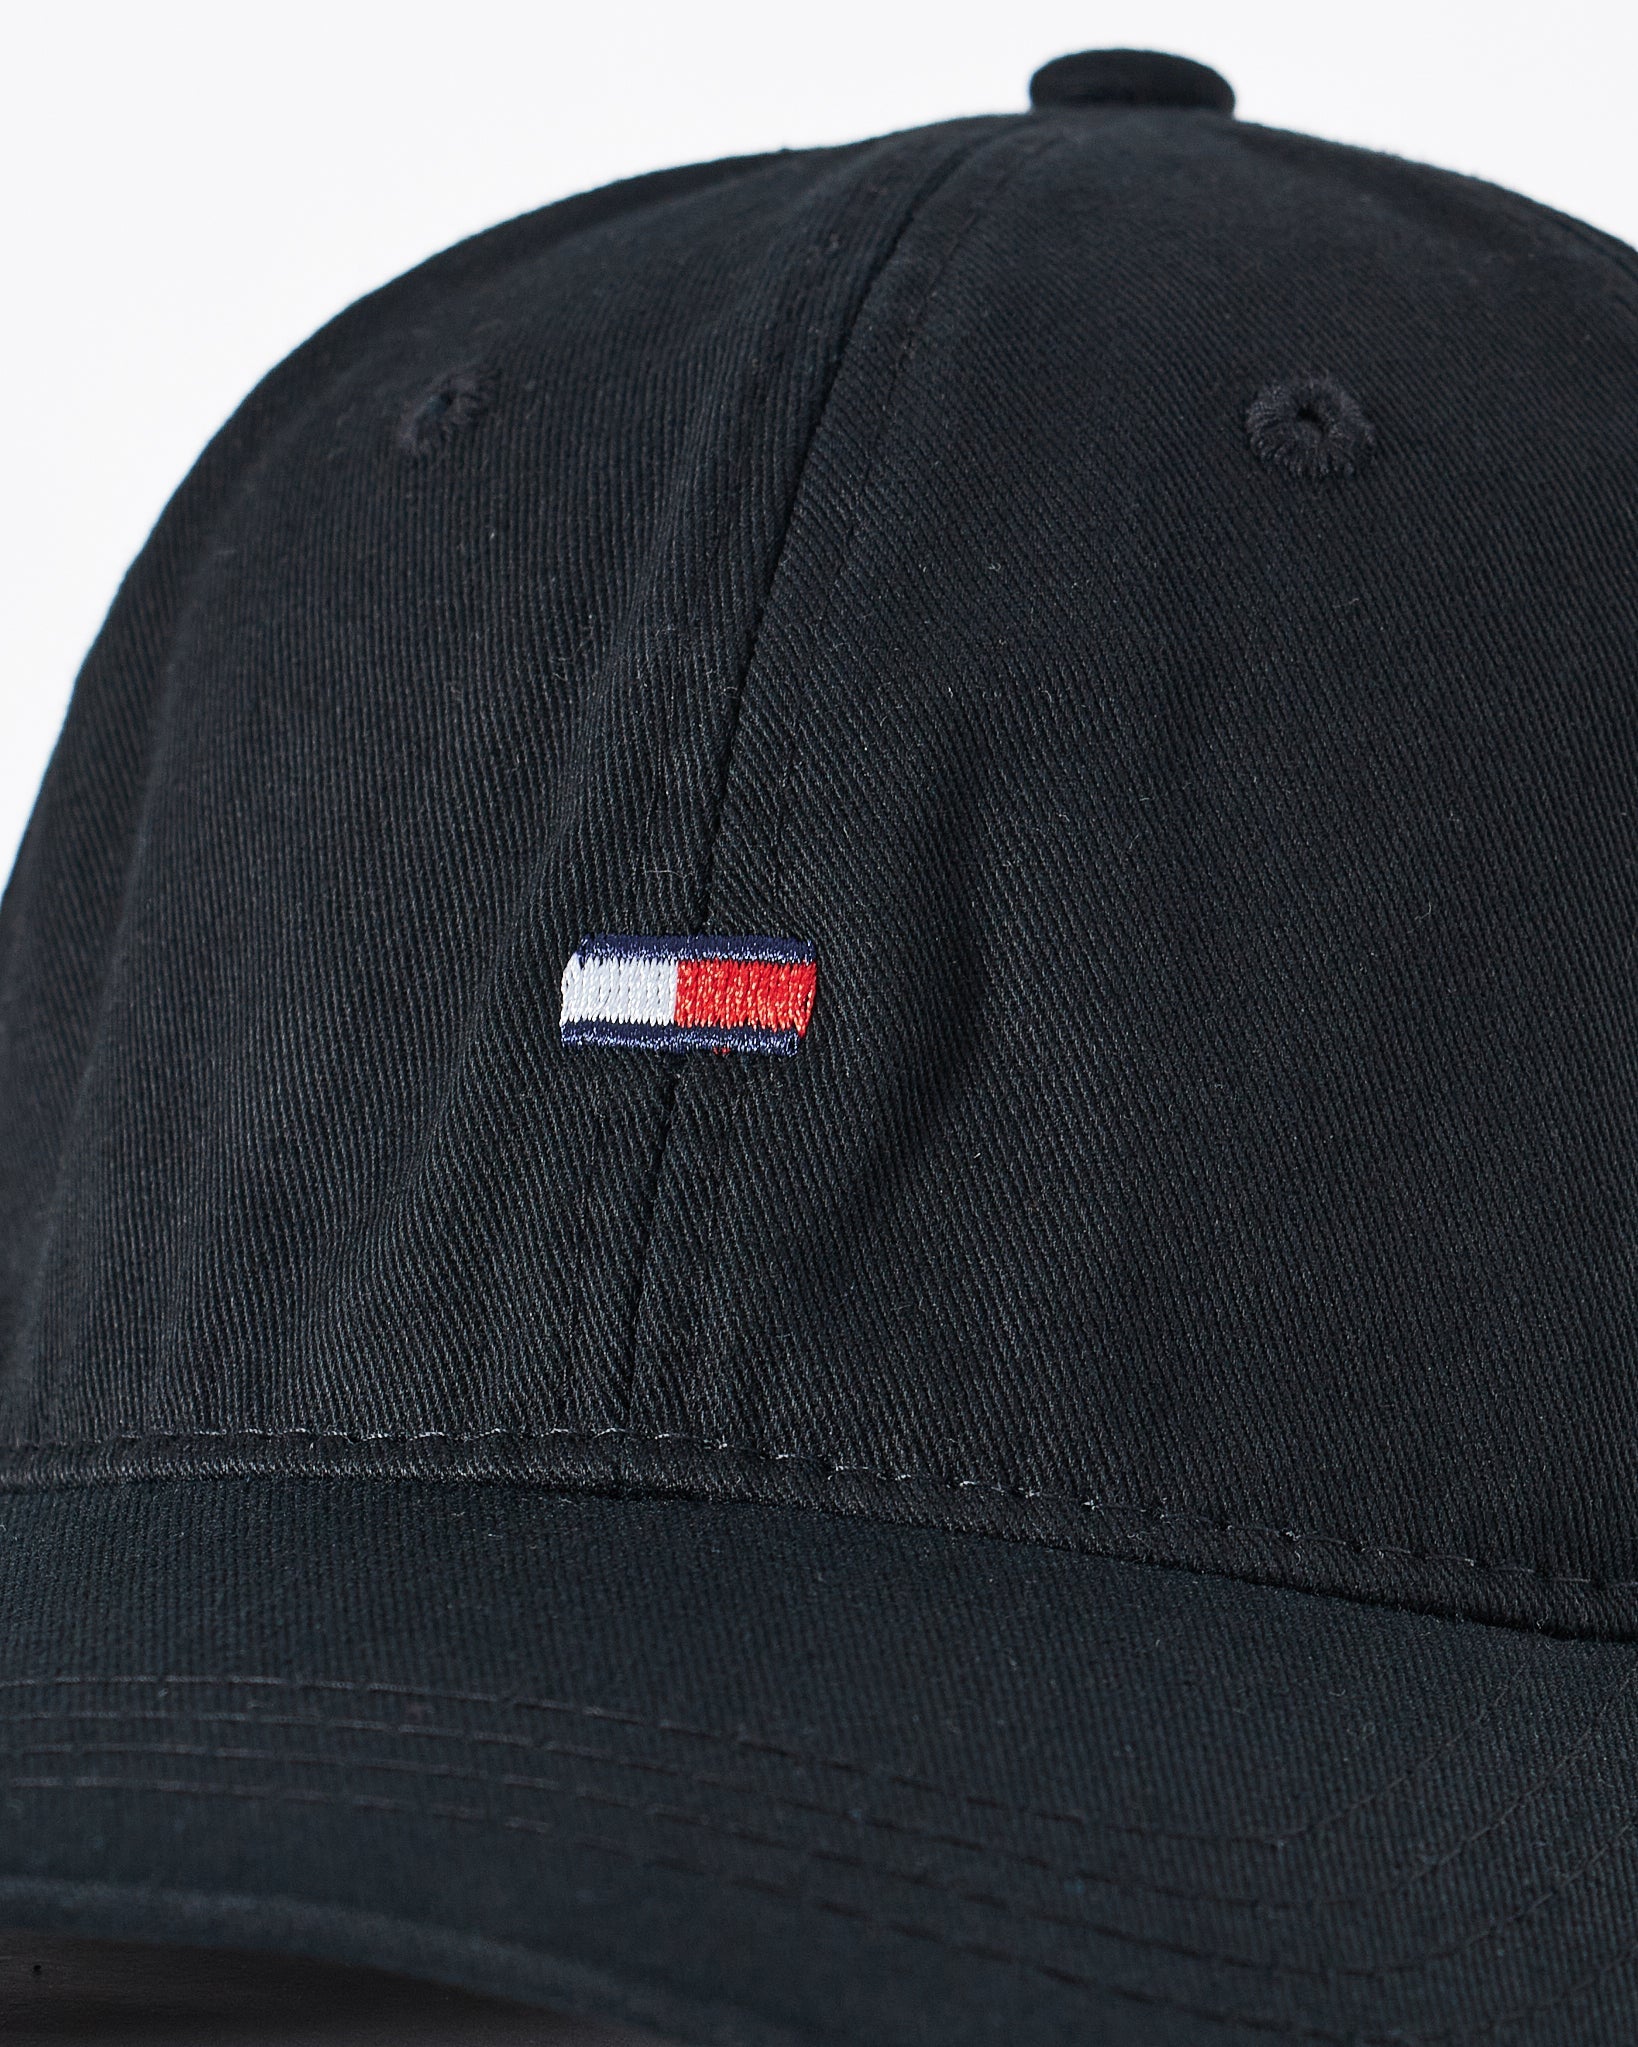 MOI OUTFIT-Tommy Black Cap 11.90